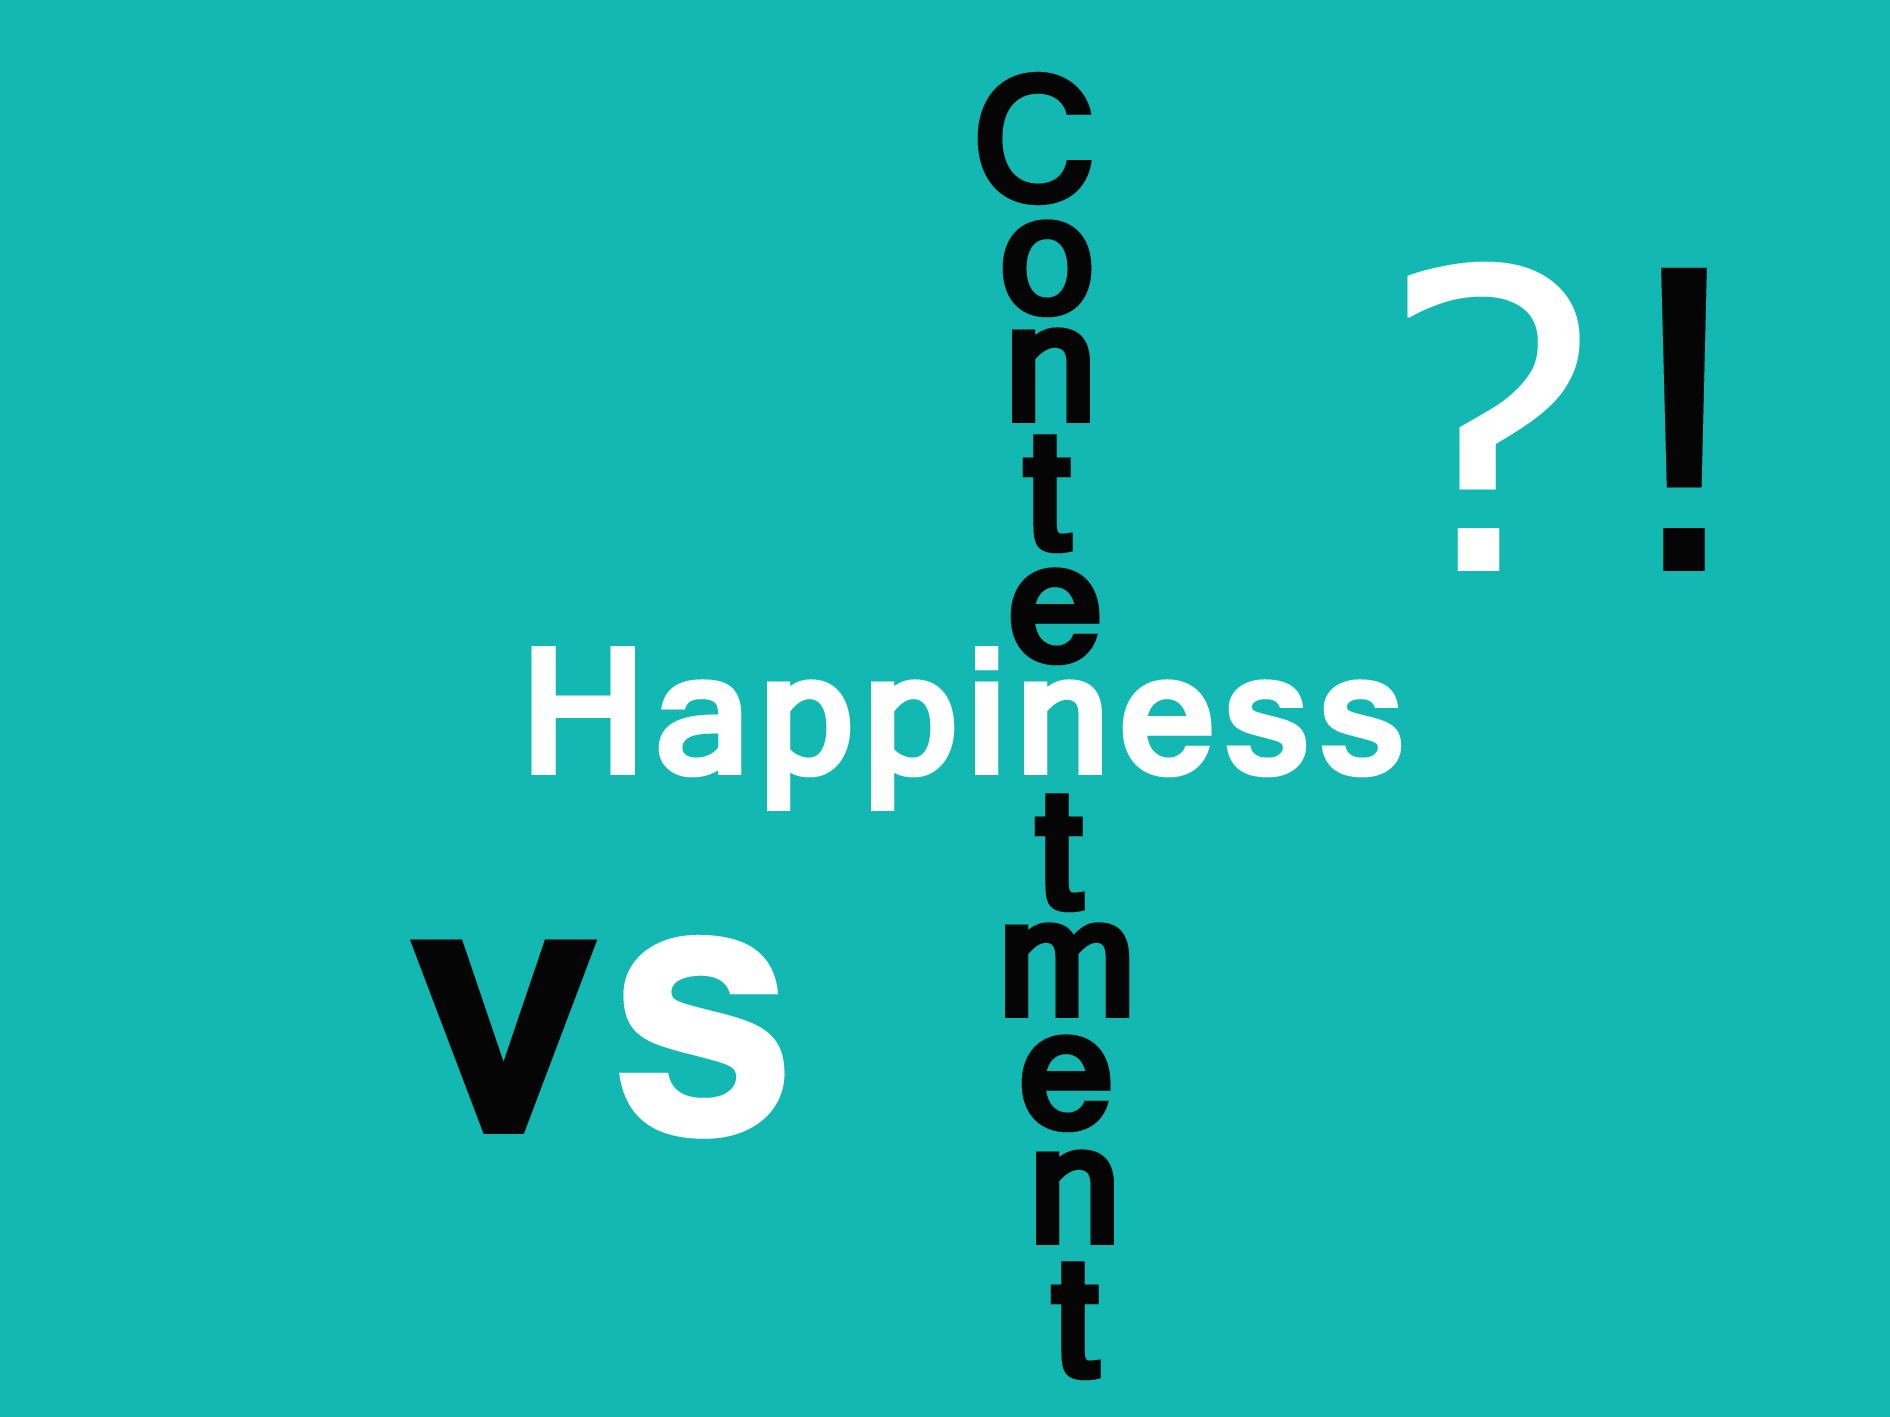 Happiness v/s pleasure. Vs meaning